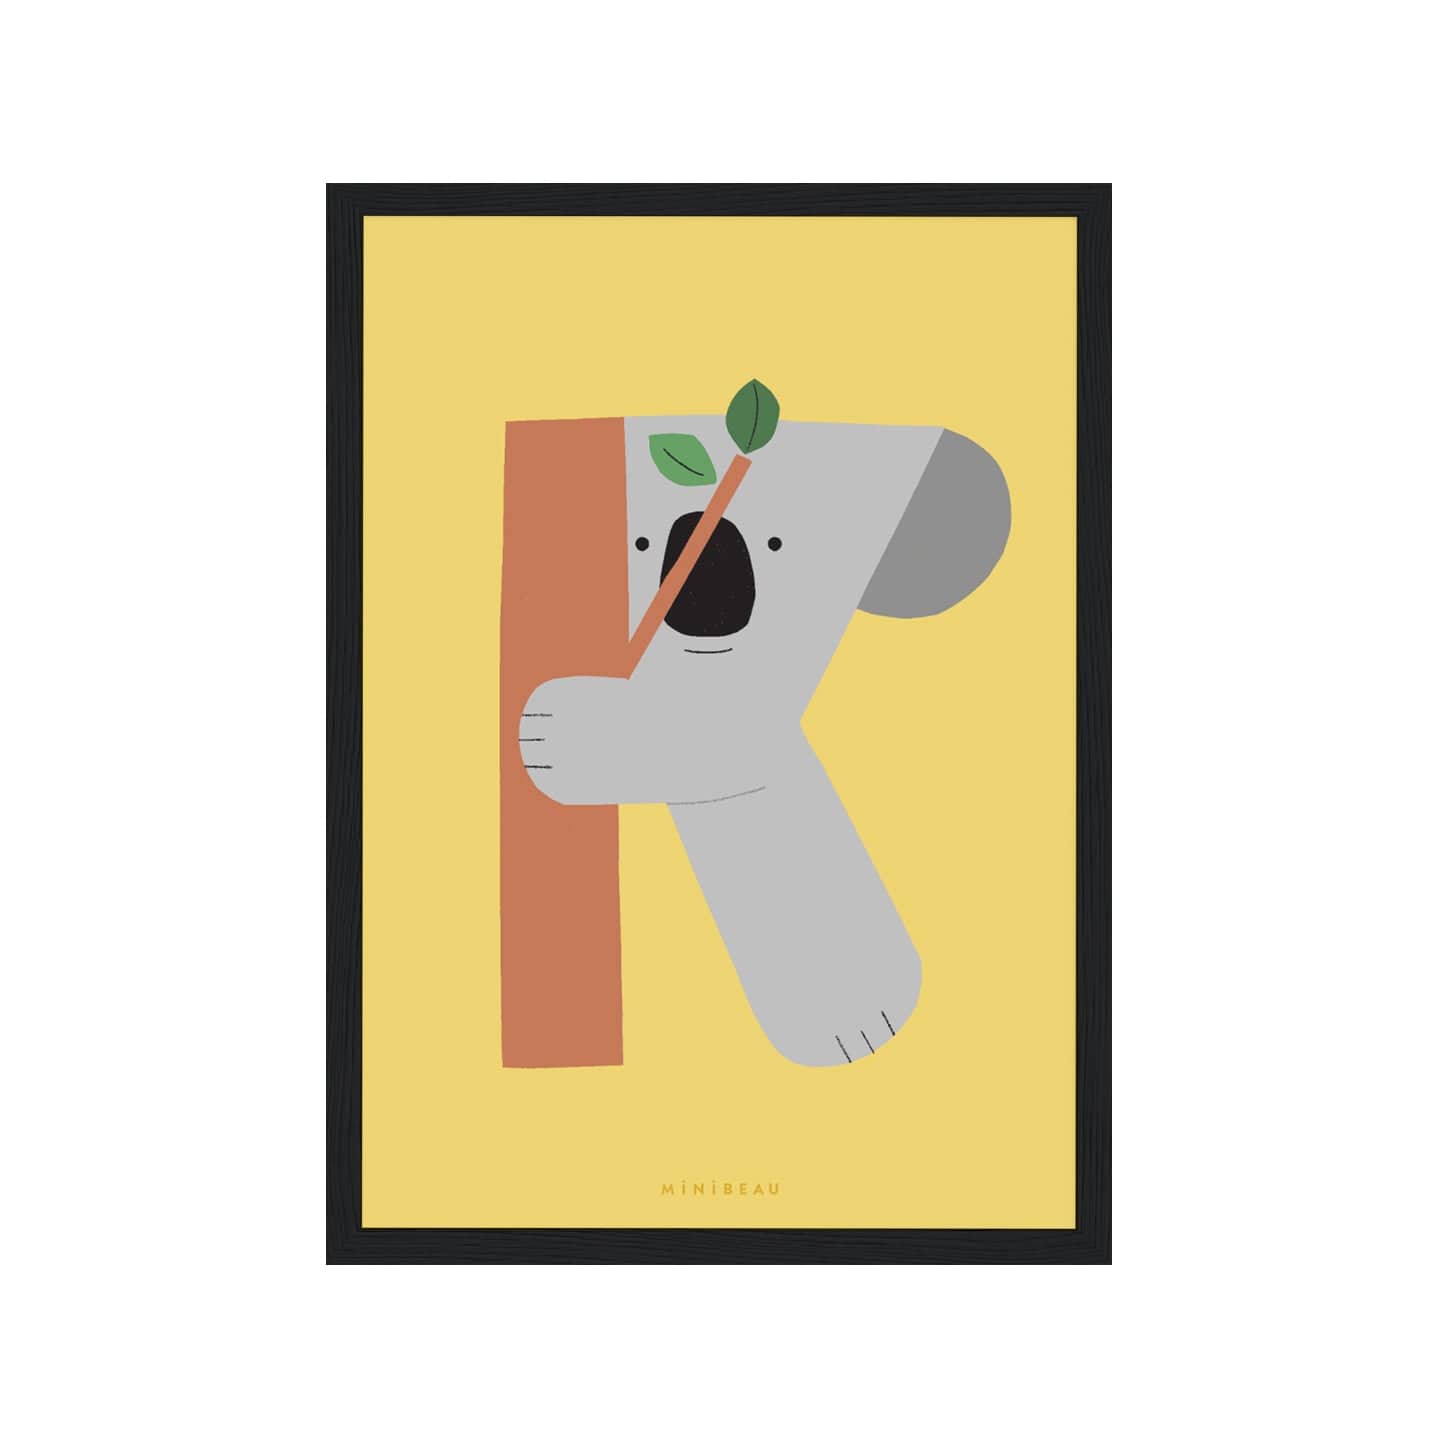 Art print in a black frame. Our Happy Alphabet 'K' Art Print shows a smiling grey koala climbing a tree, making a K on a yellow background.